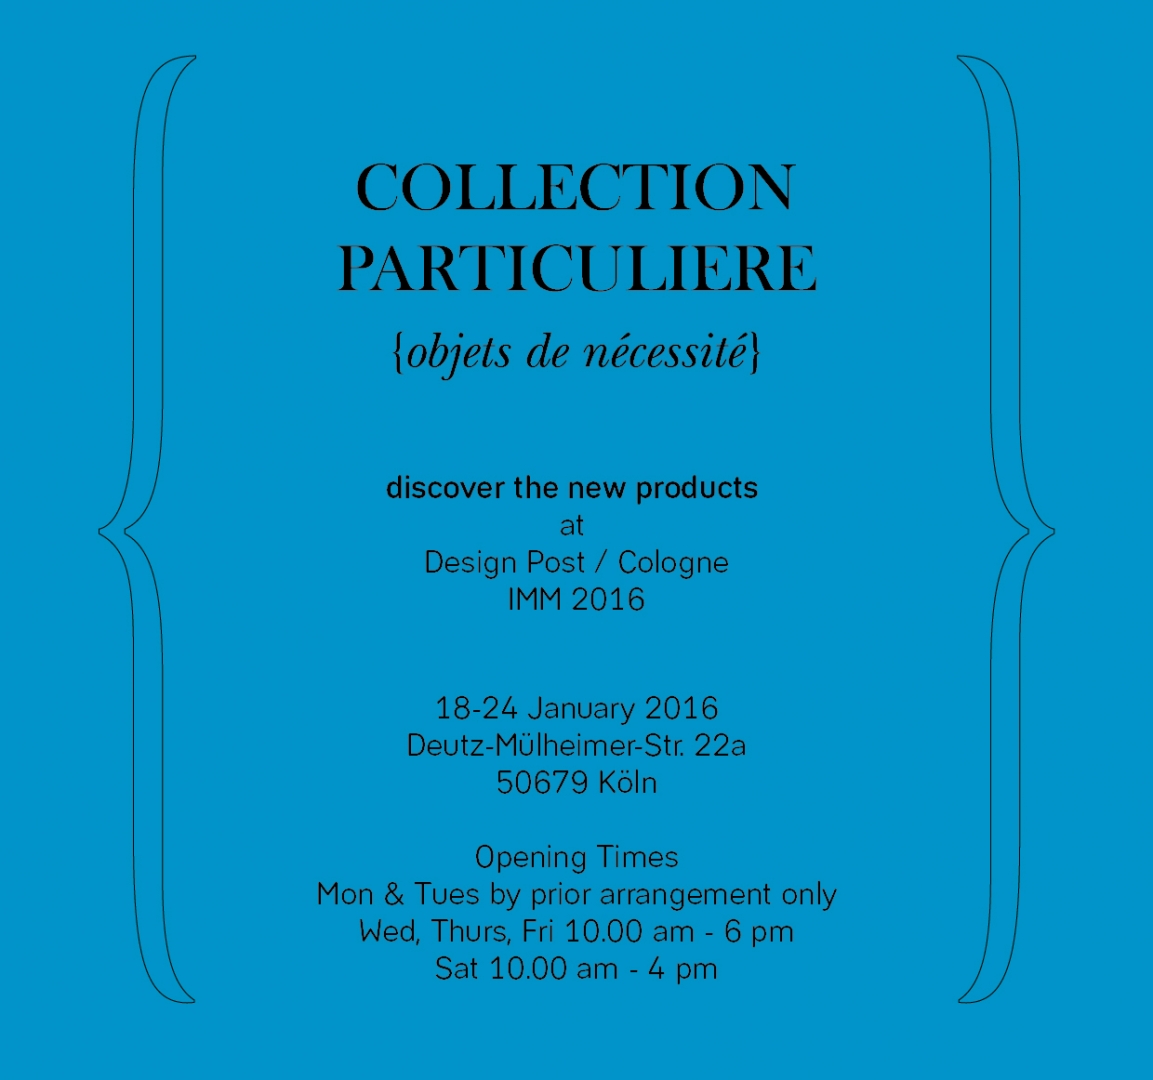 COLLECTION PARTICULIERE invetation copy-01.jpg